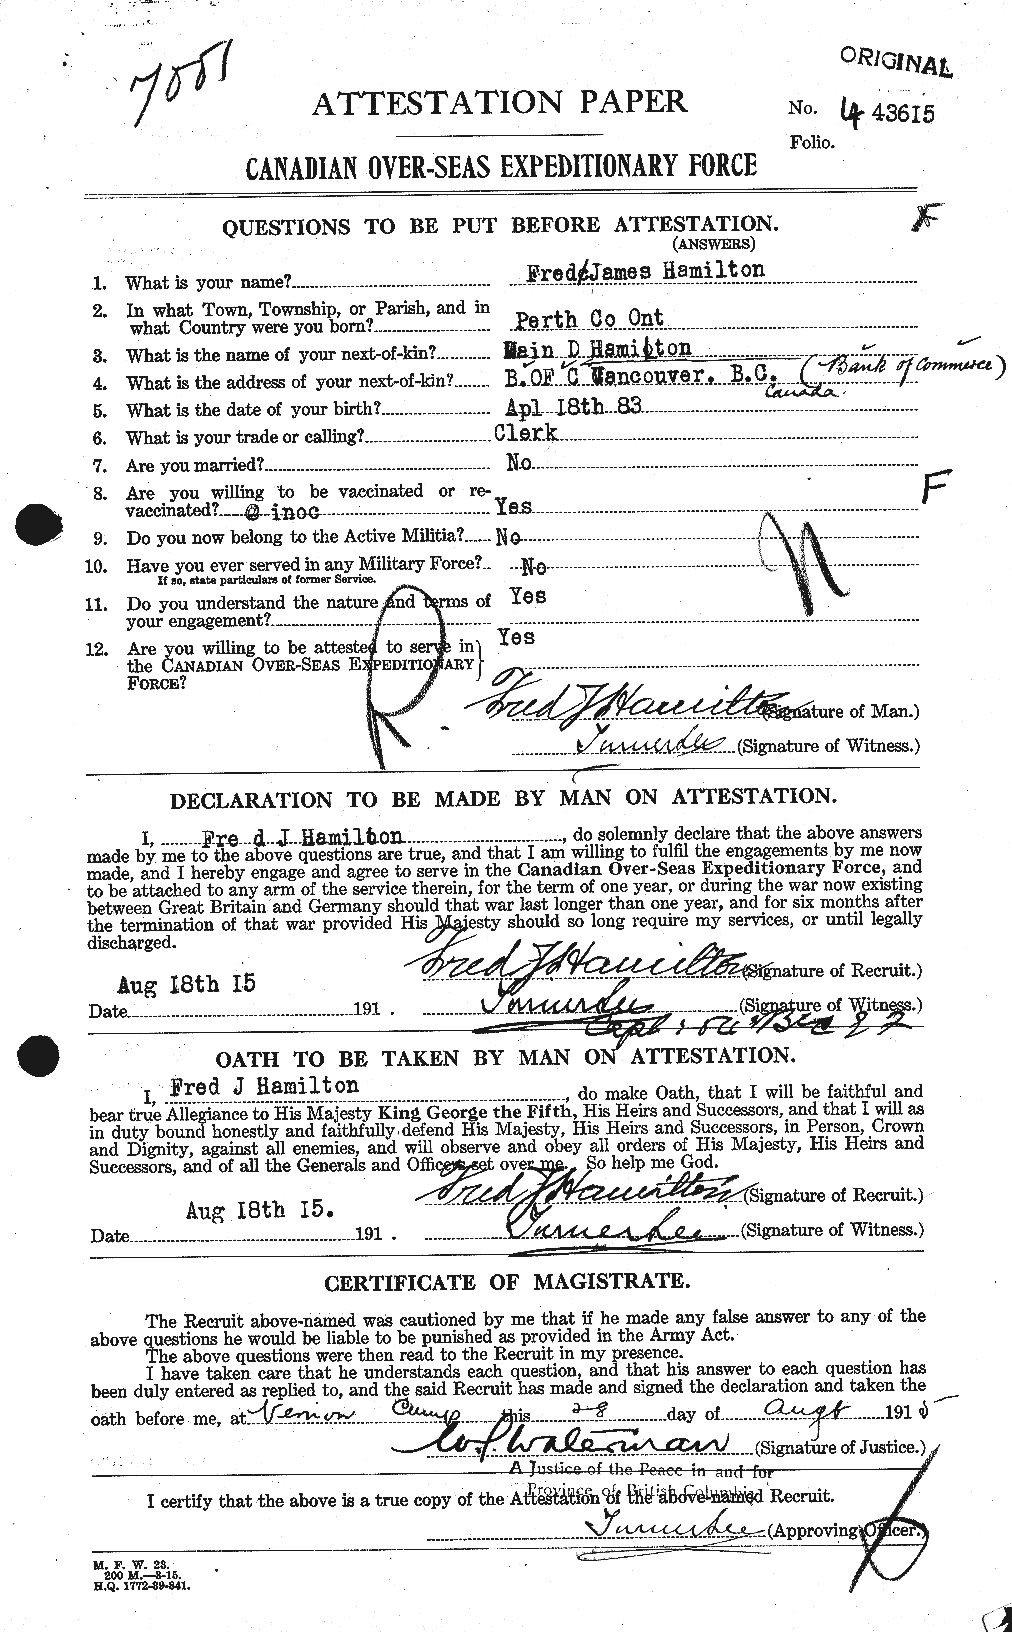 Personnel Records of the First World War - CEF 372399a